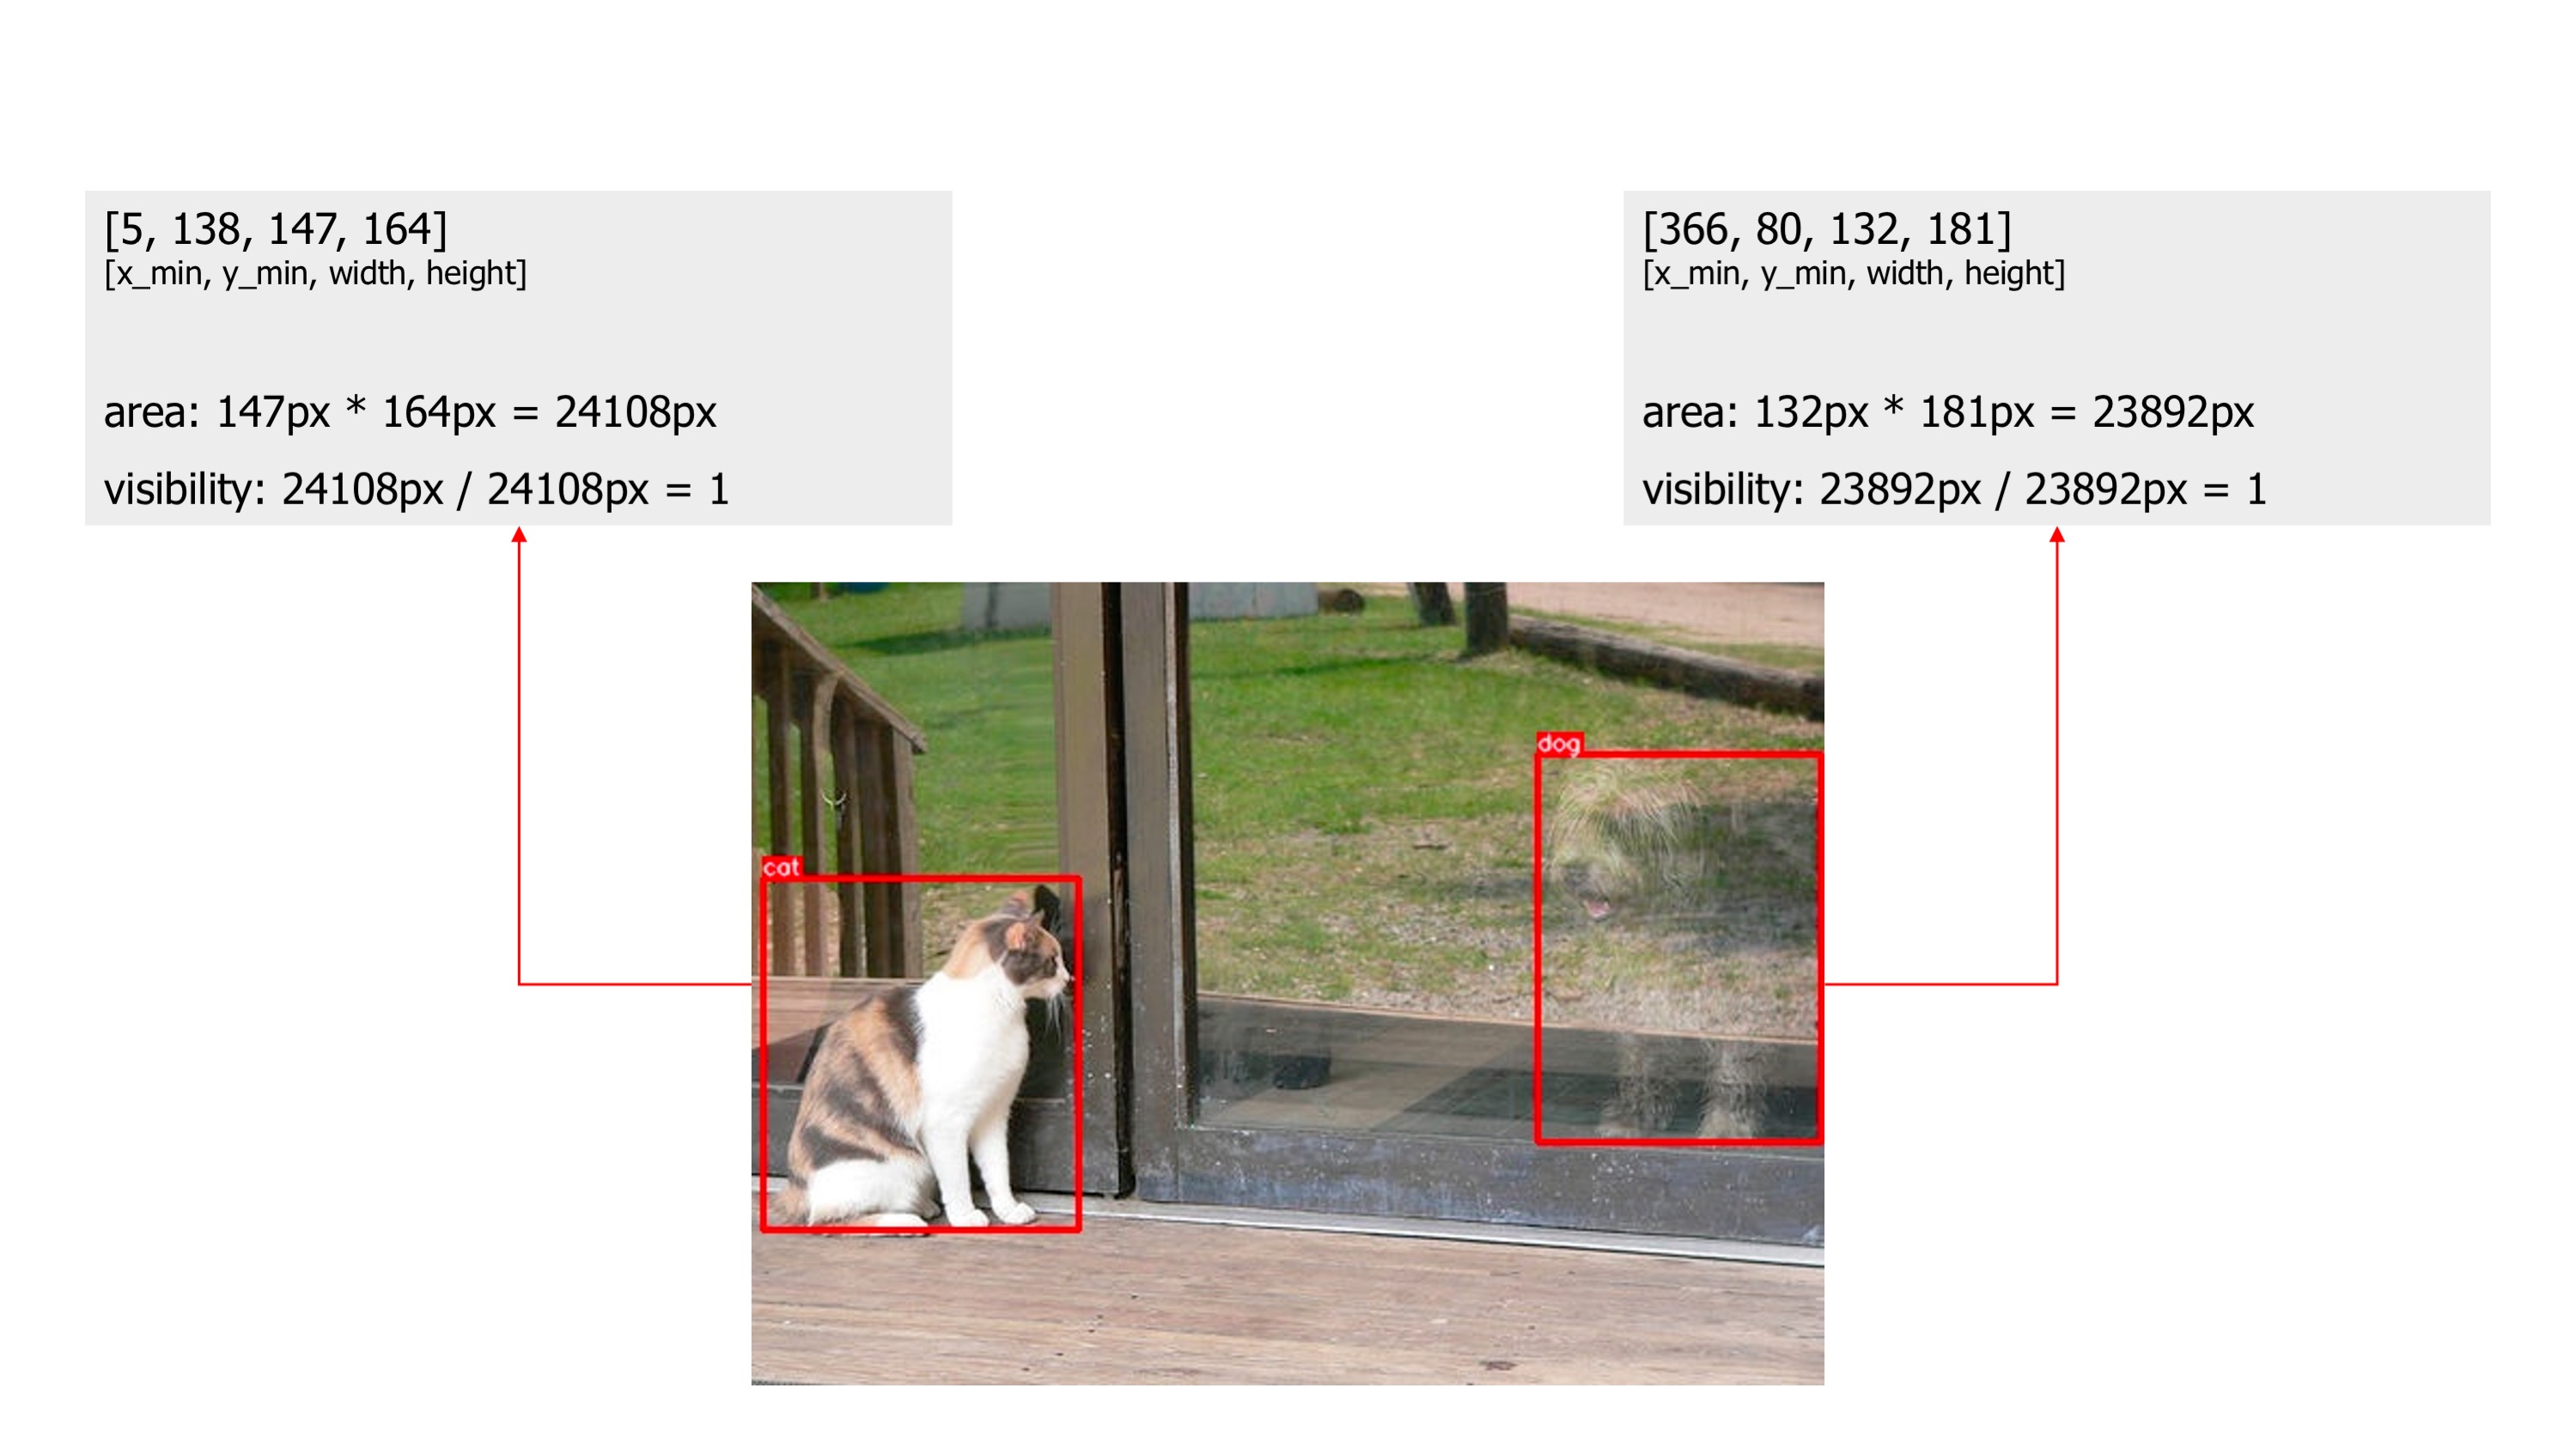 An example image with two bounding boxes